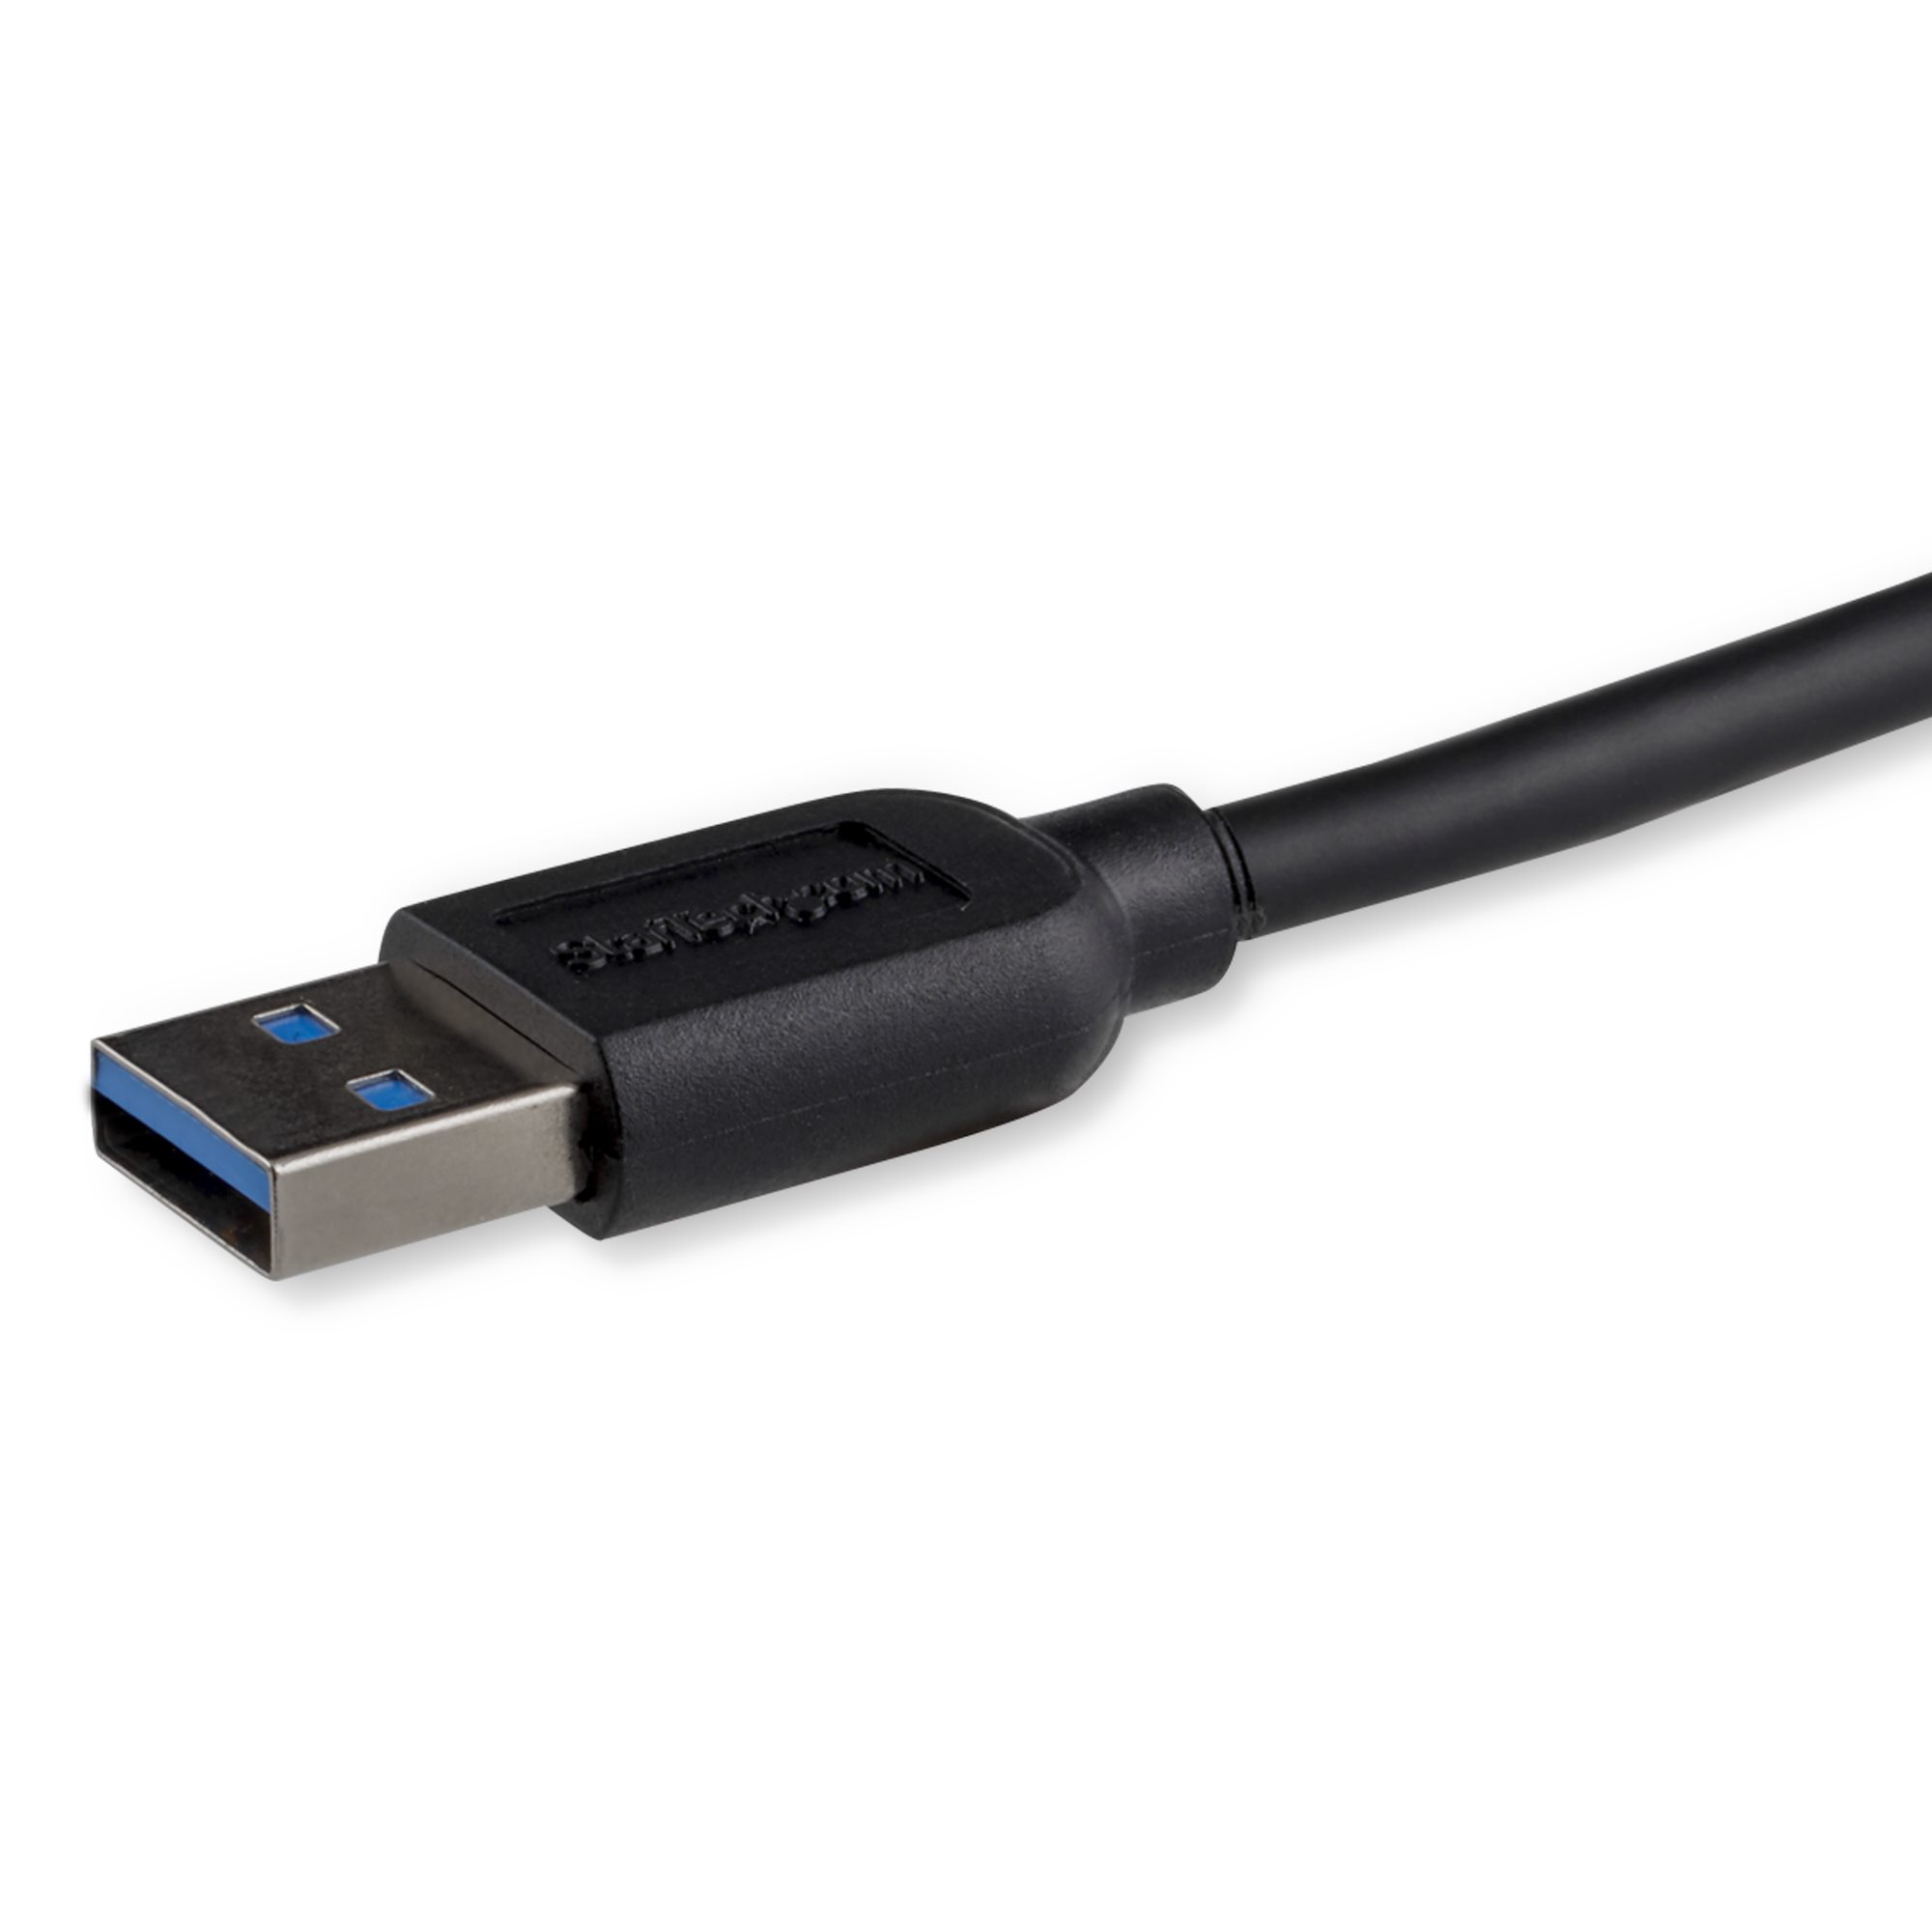 0.5m 20in Slim USB 3.0 Micro B Cable - USB 3.0 Cables | Cables